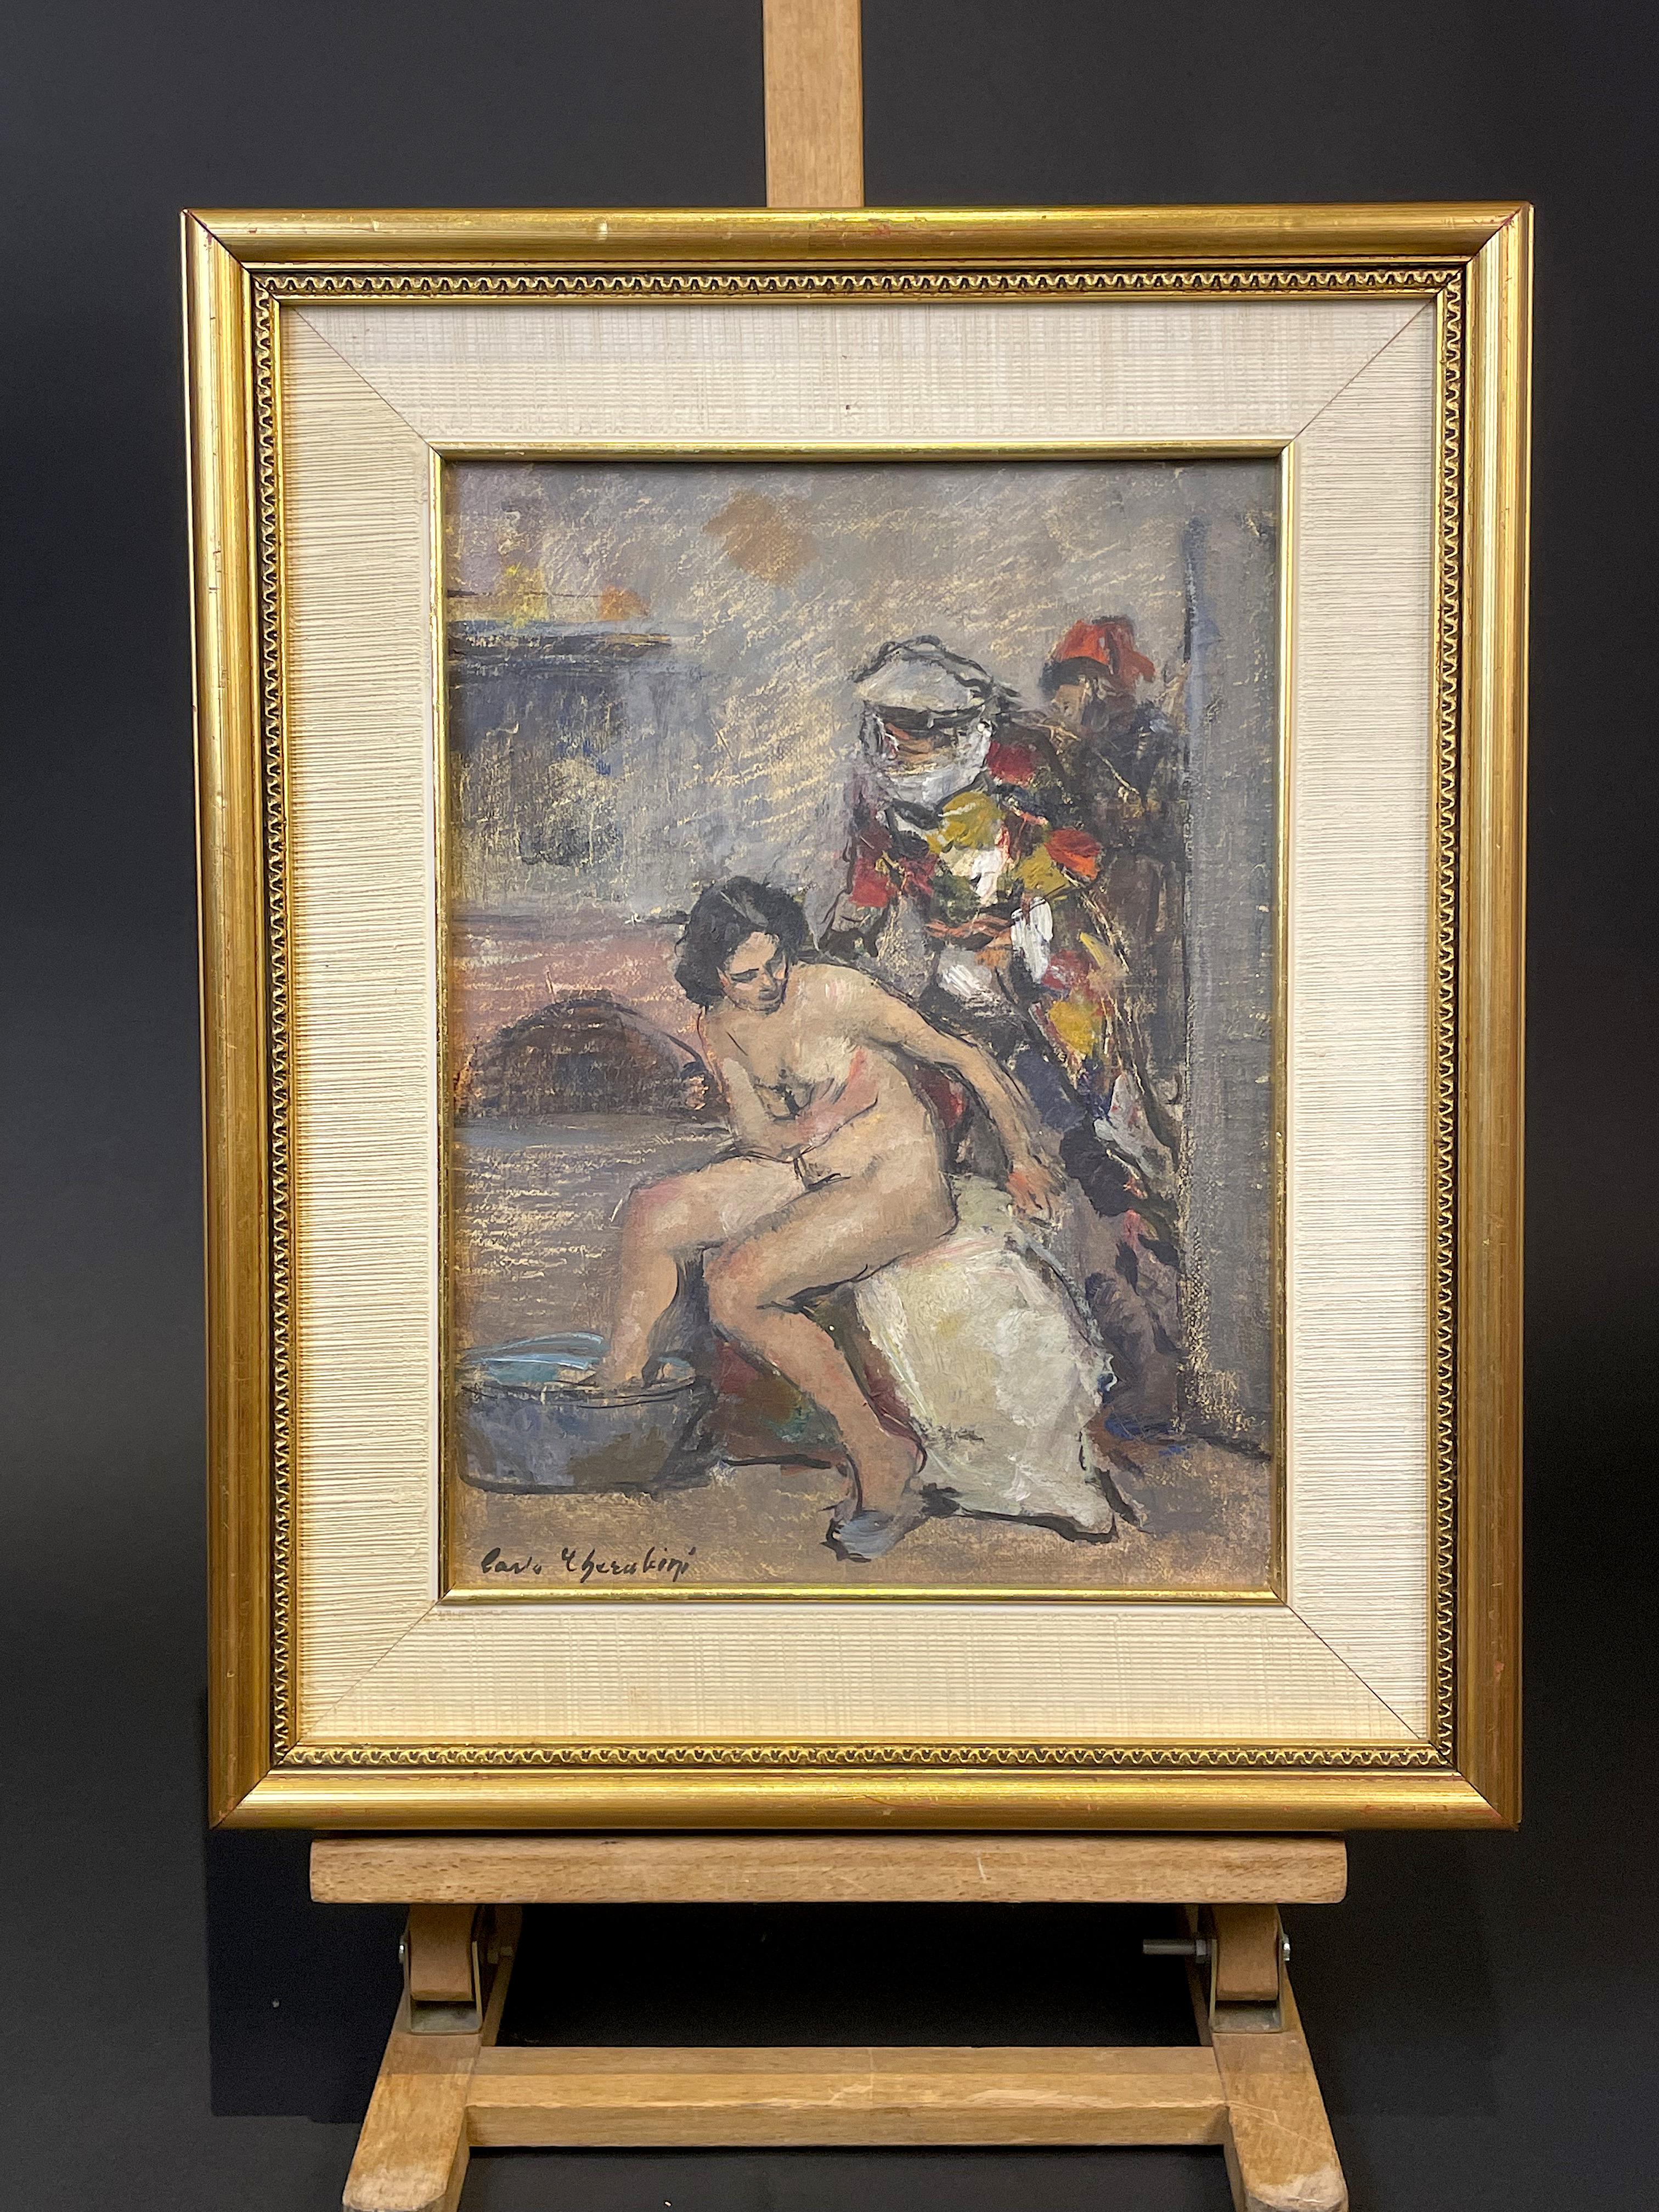 Oil-on-canvas painting by Venetian painter Carlo CHERUBINI (Anona 1897-1978 Venice) made around the 1950s.
The work in question presents a seated female nude in the foreground; behind her are masked figures (traceable to the mask of Harlequin),